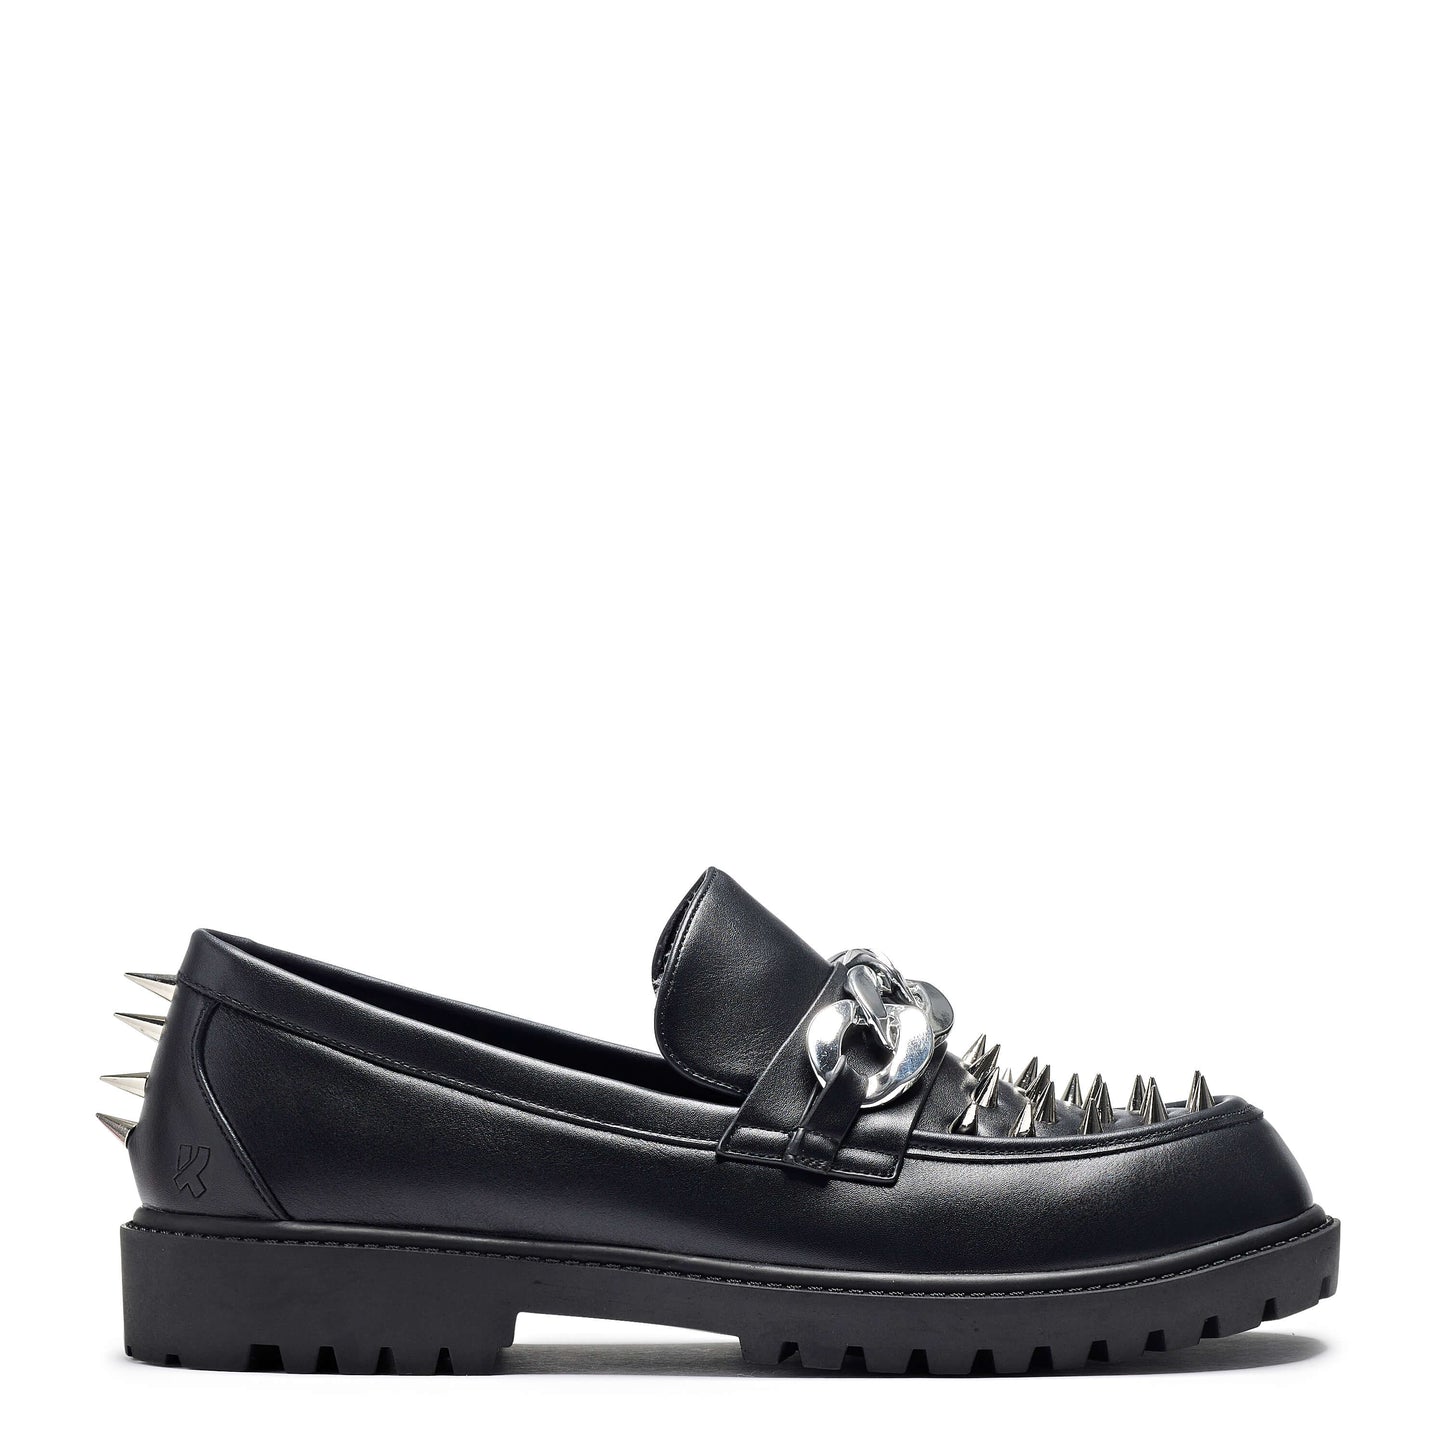 The Grave Warden Men's Spiked Loafers - Shoes - KOI Footwear - Black - Main View